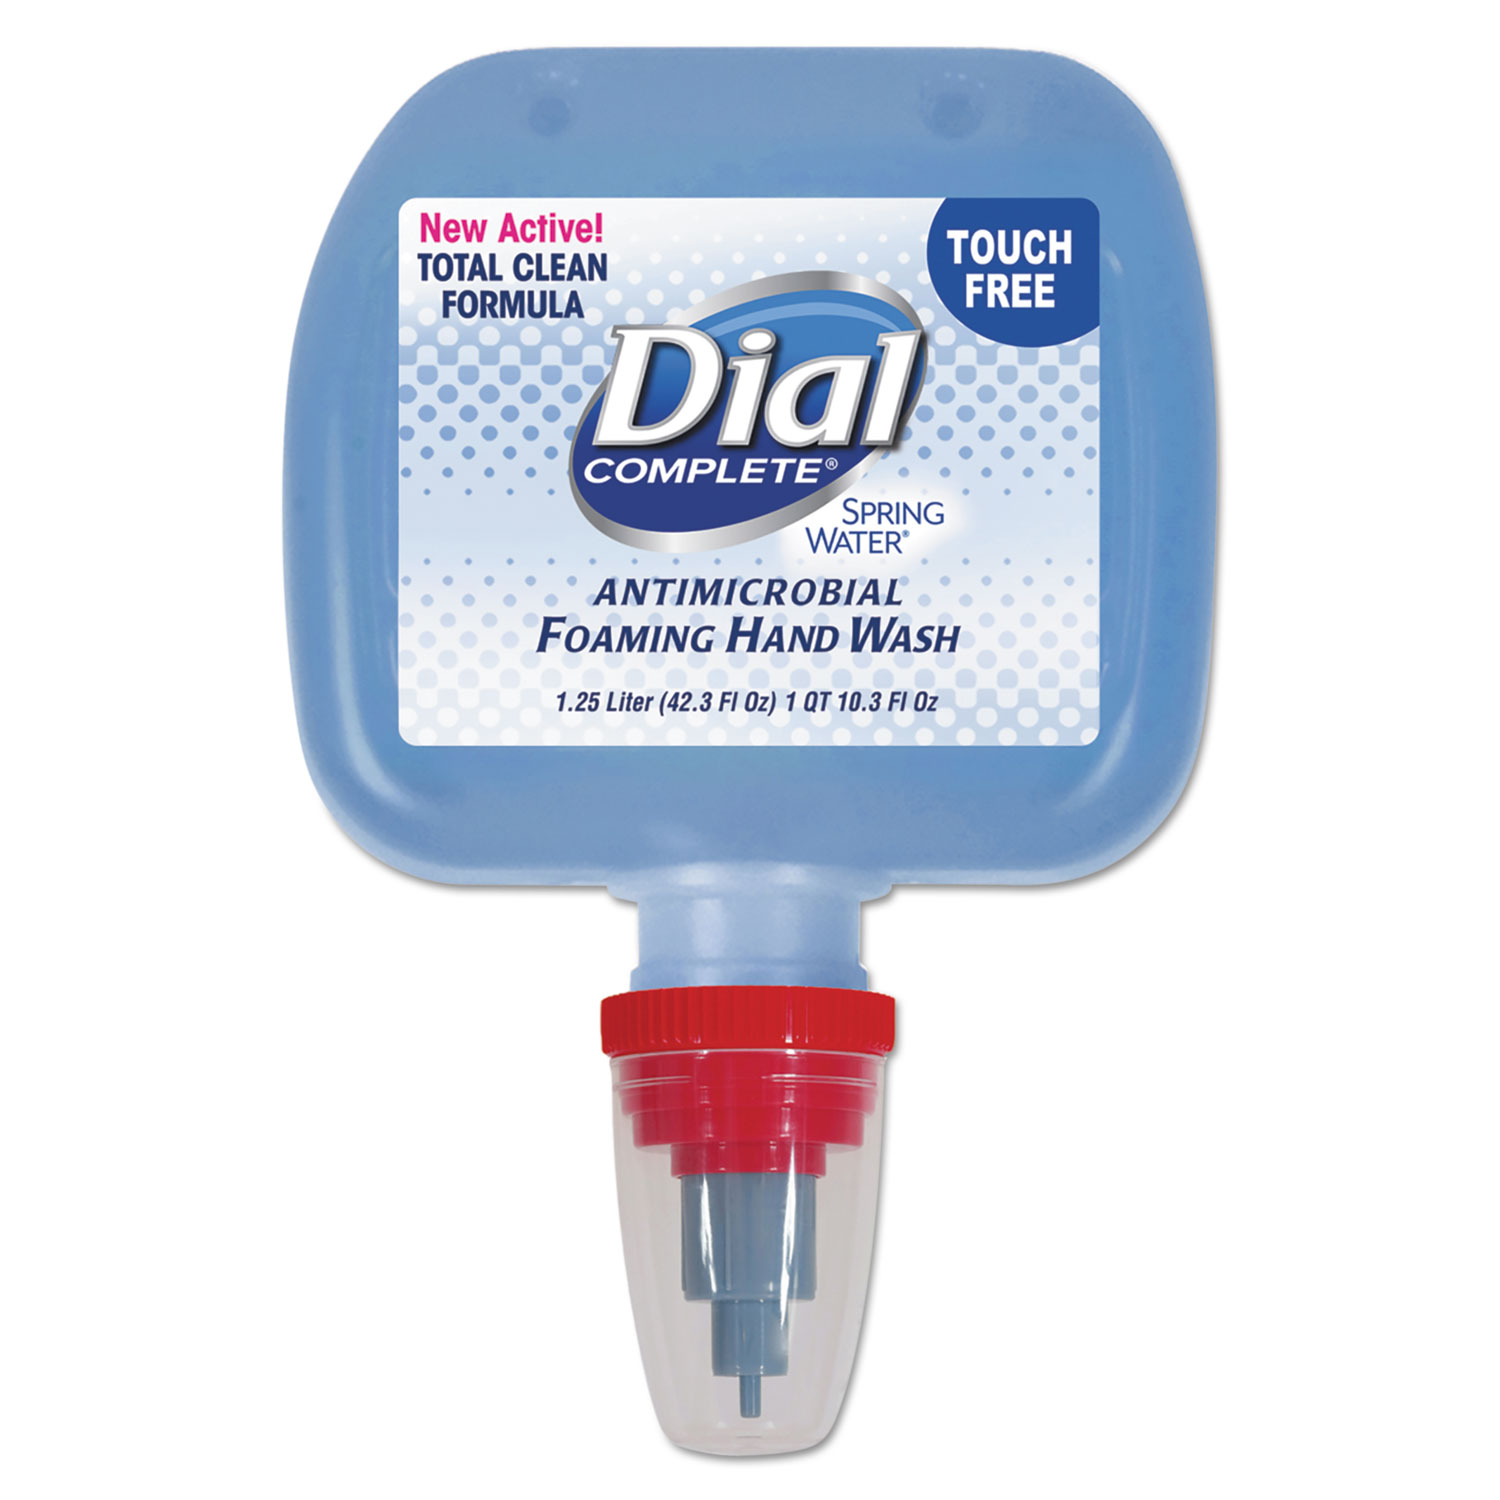  Dial Professional 17000134369 Antimicrobial Foaming Hand Wash, 1.25 L, Spring Water (DIA13436EA) 